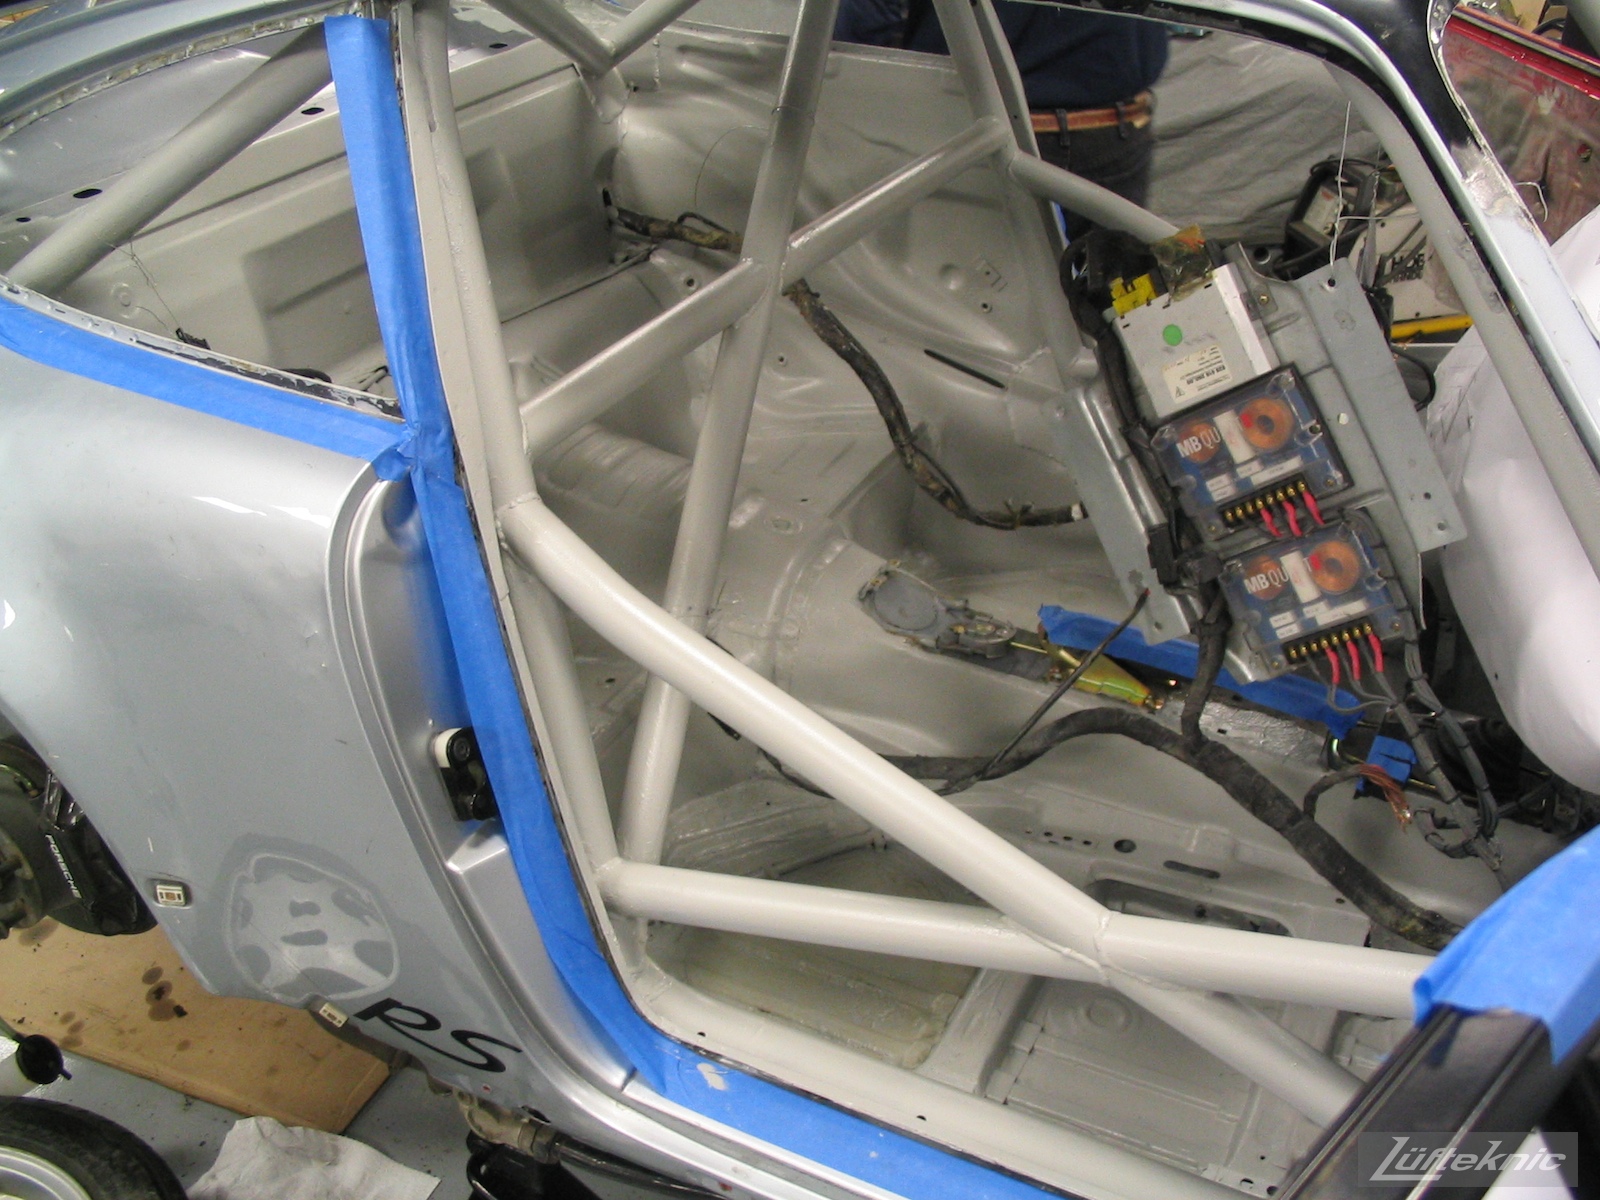 Roll cage has been installed and painted on the 964 RS America project, shown with no seats.